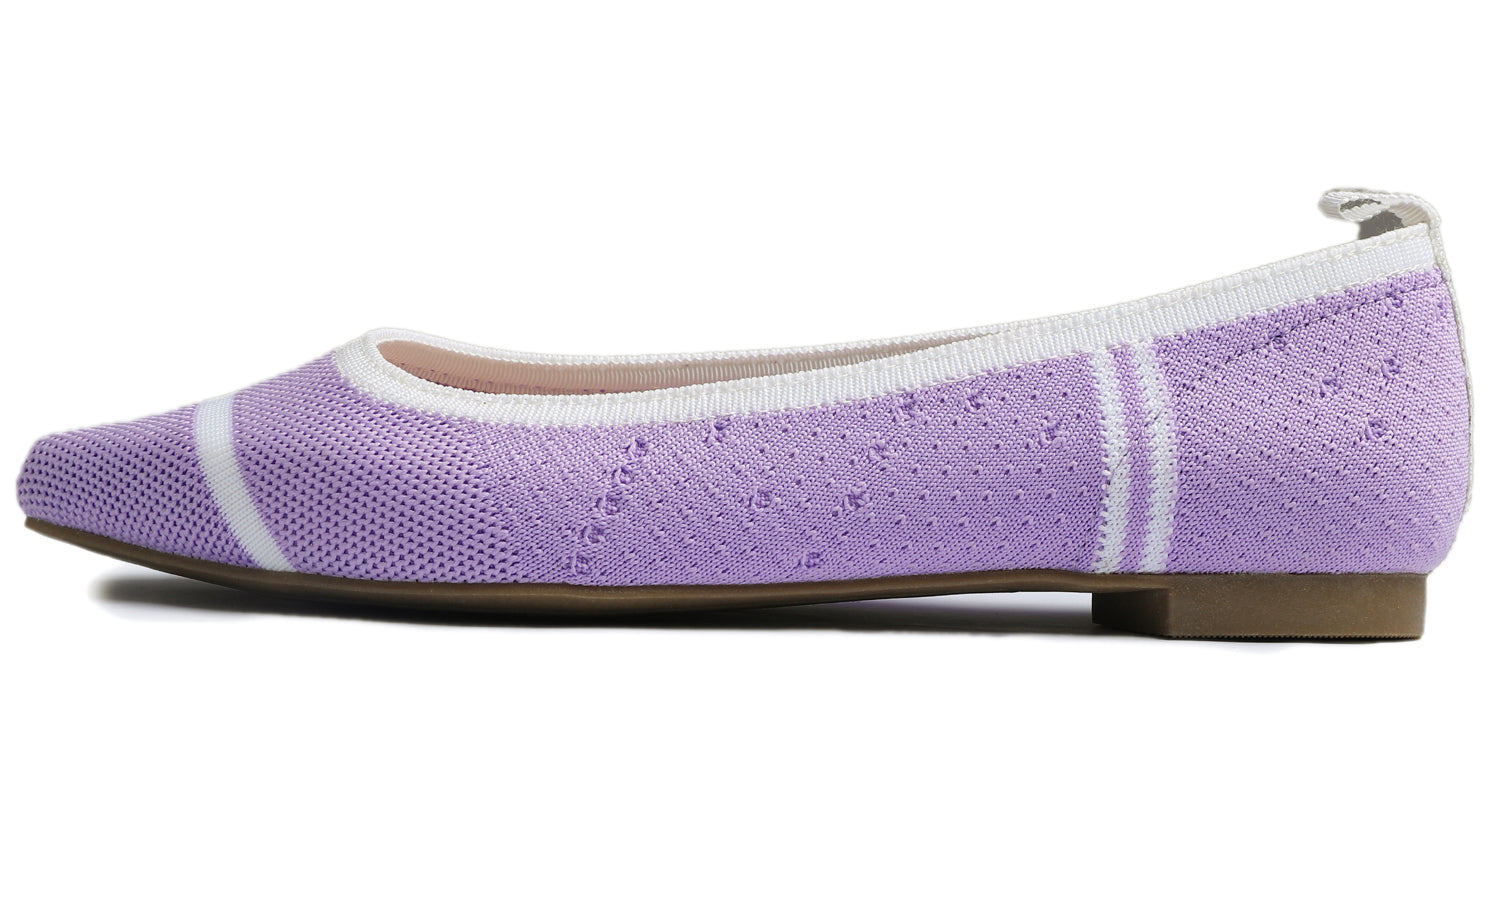 Feversole Women's Woven Fashion Breathable Knit Flat Shoes Pointed Lavender White Stripe